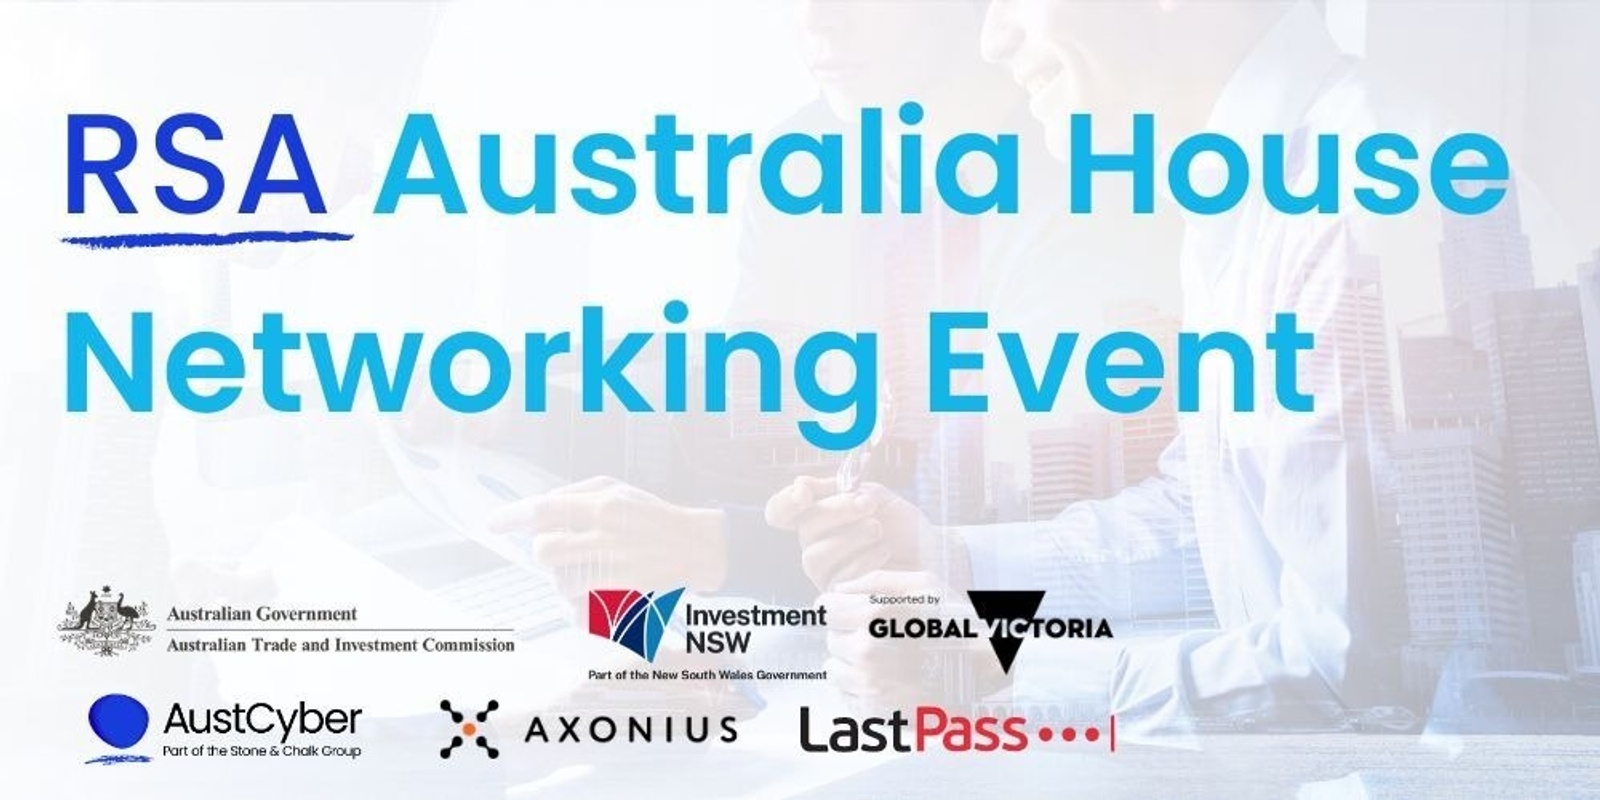 Banner image for AustCyber x Austrade RSA Australia House Networking Event